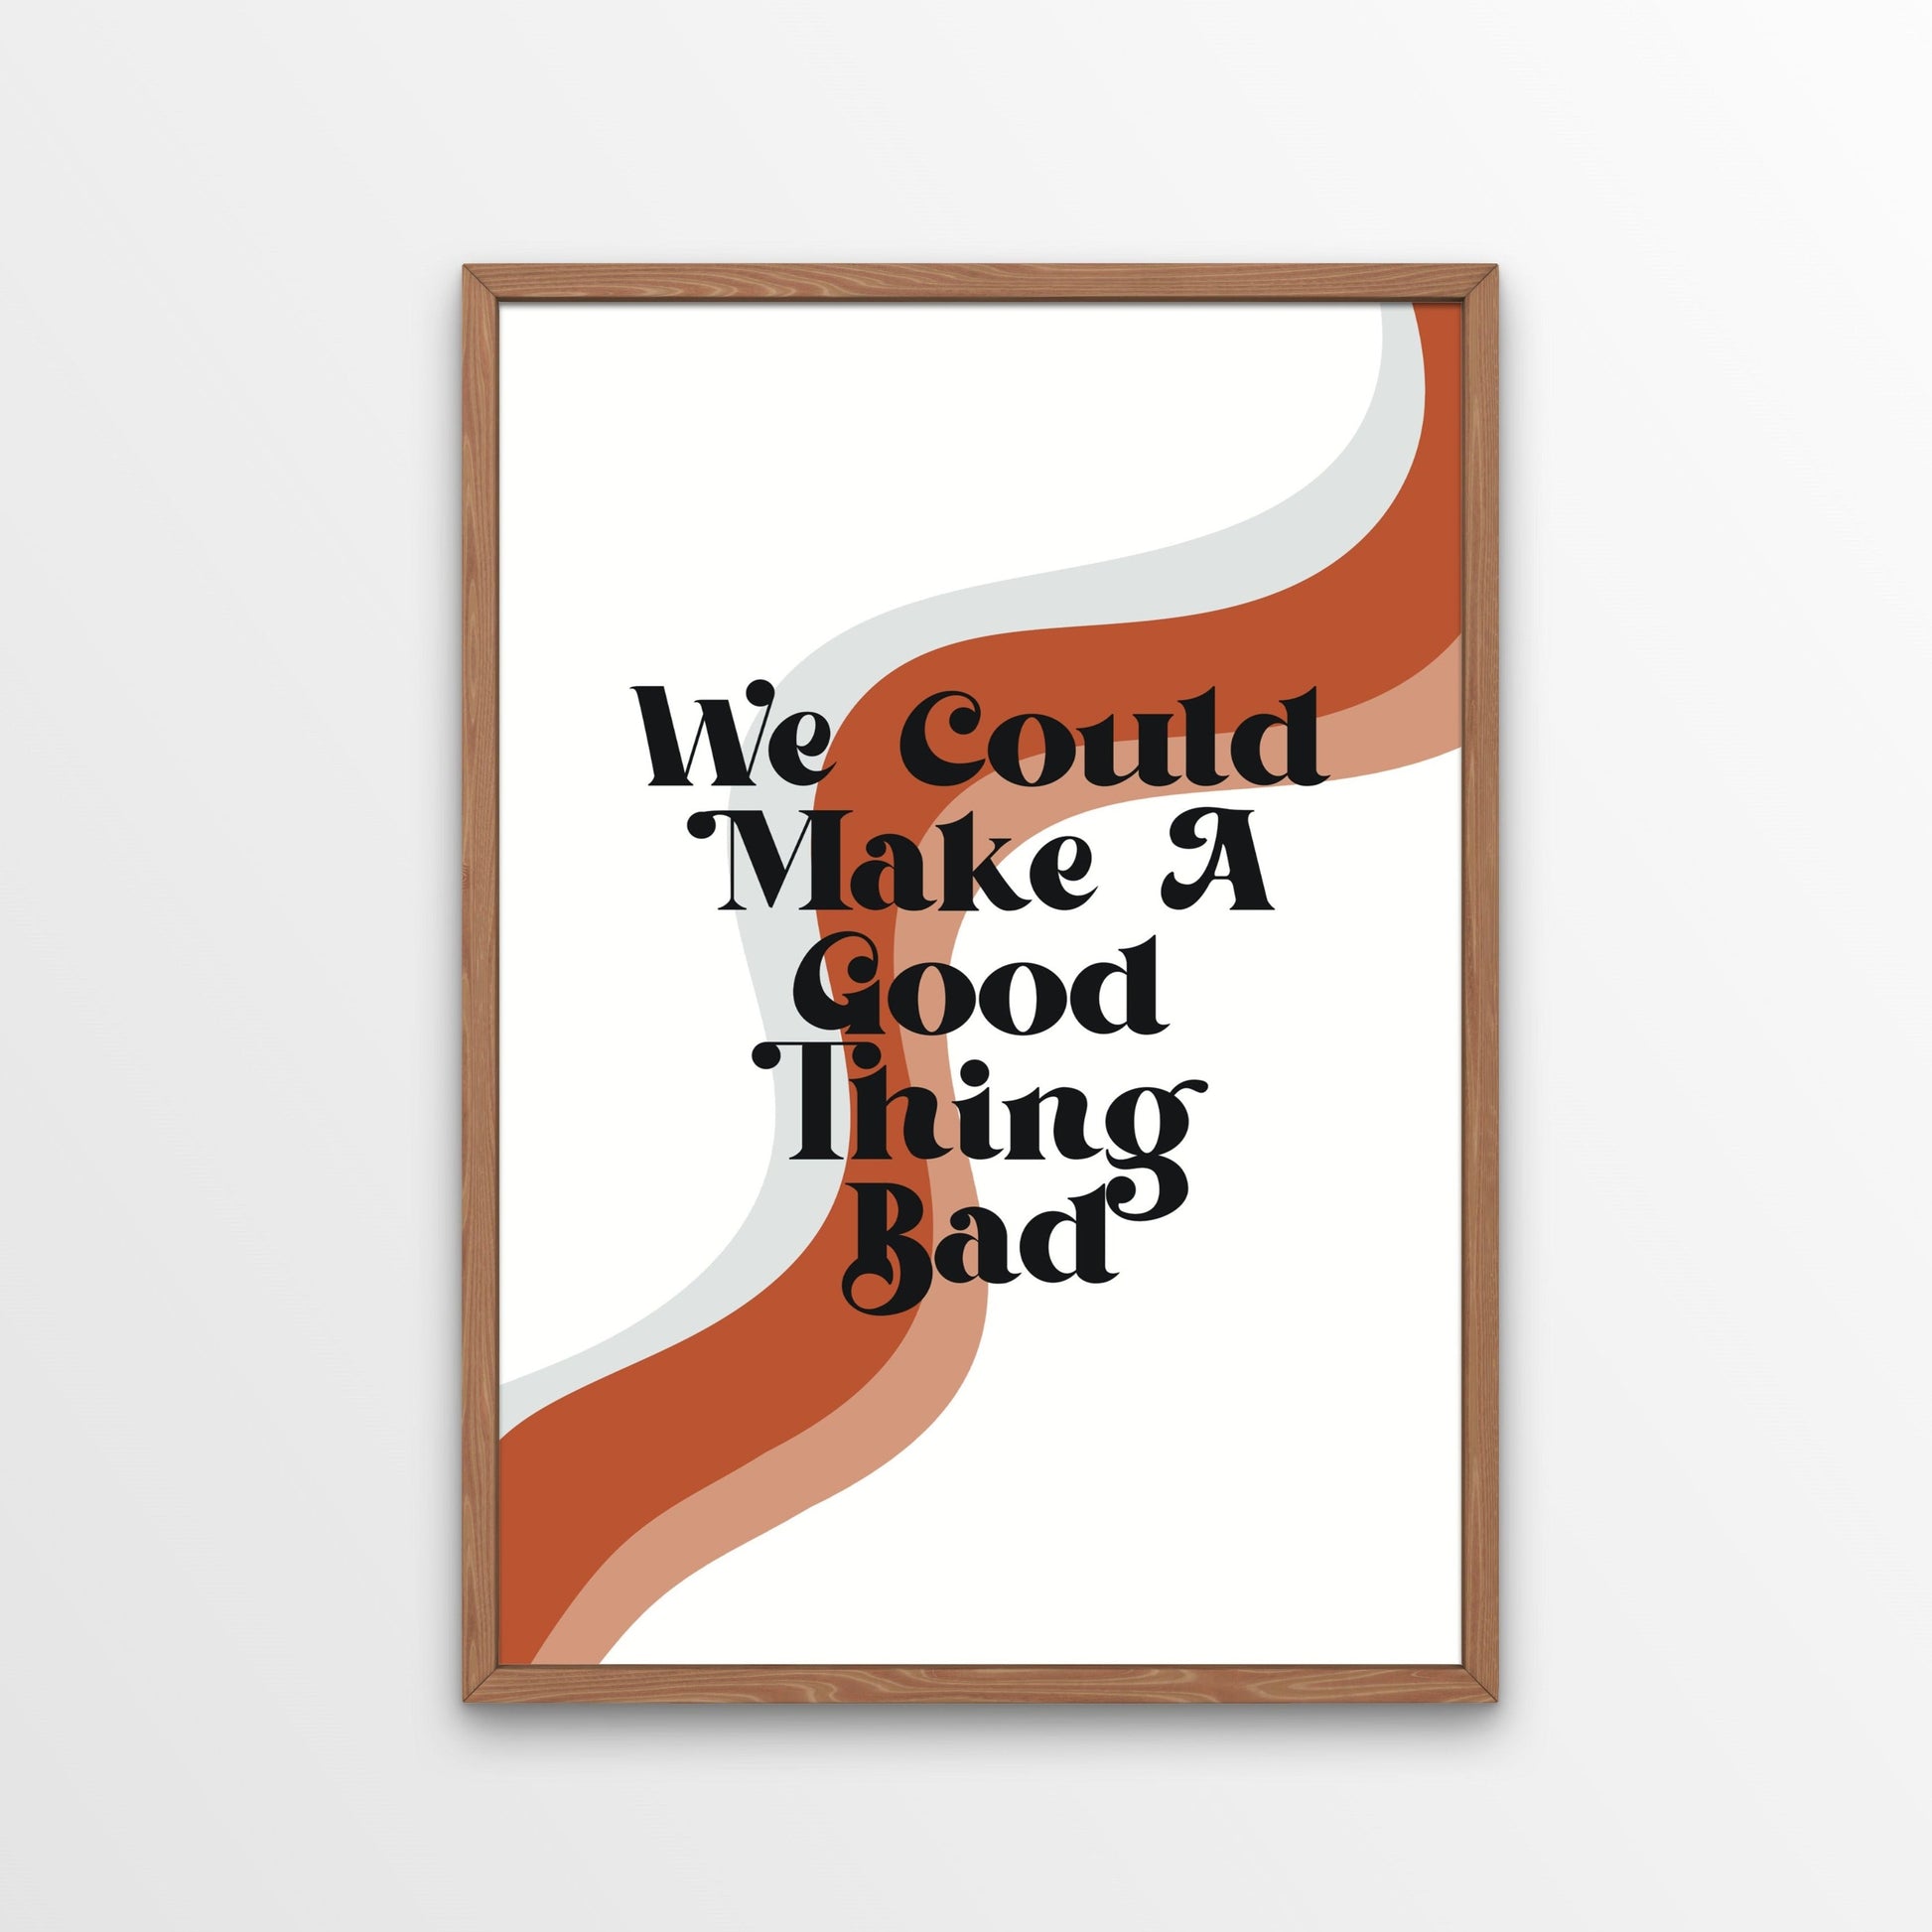 Introducing the latest addition to our collection of quote designs! This iconic lyric print is inspired by our favourite new show 'Daisy Jones and The Six'.  WE COULD MAKE A GOOD THING BAD. Printed in a retro styled font, this quote resonates with the essence of the show's story, where music, love, and fame collided in the most explosive ways. 